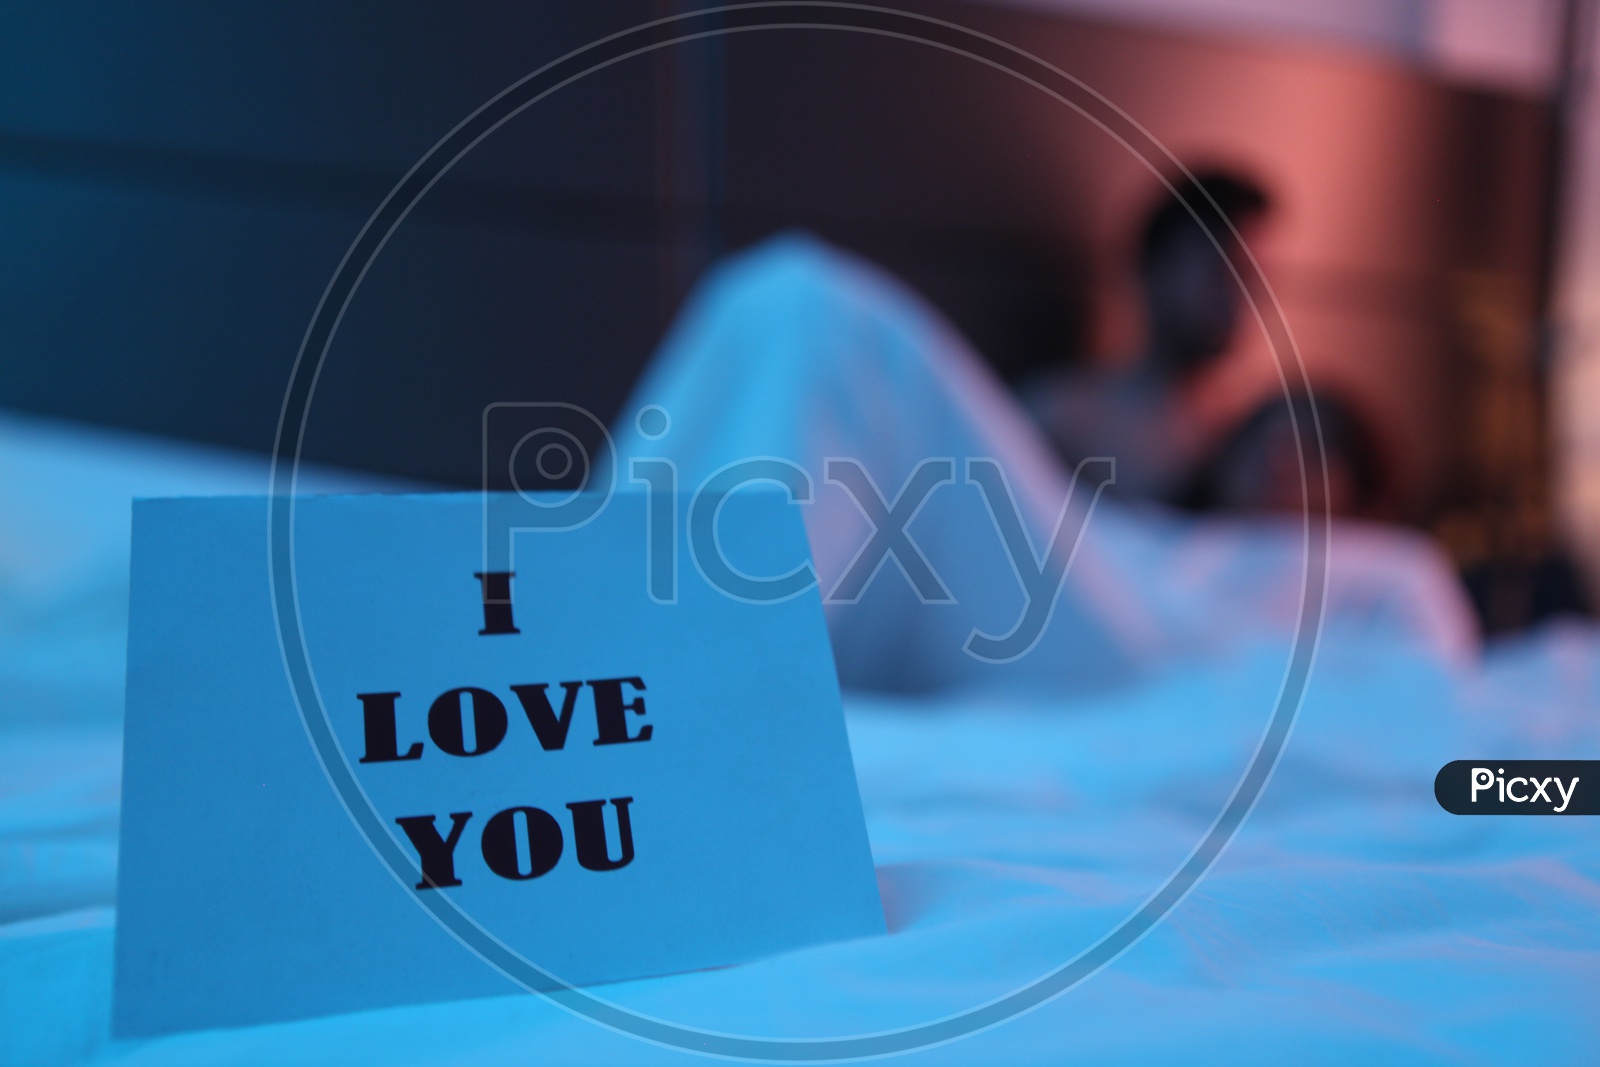 I Love You Placard In a Bedroom